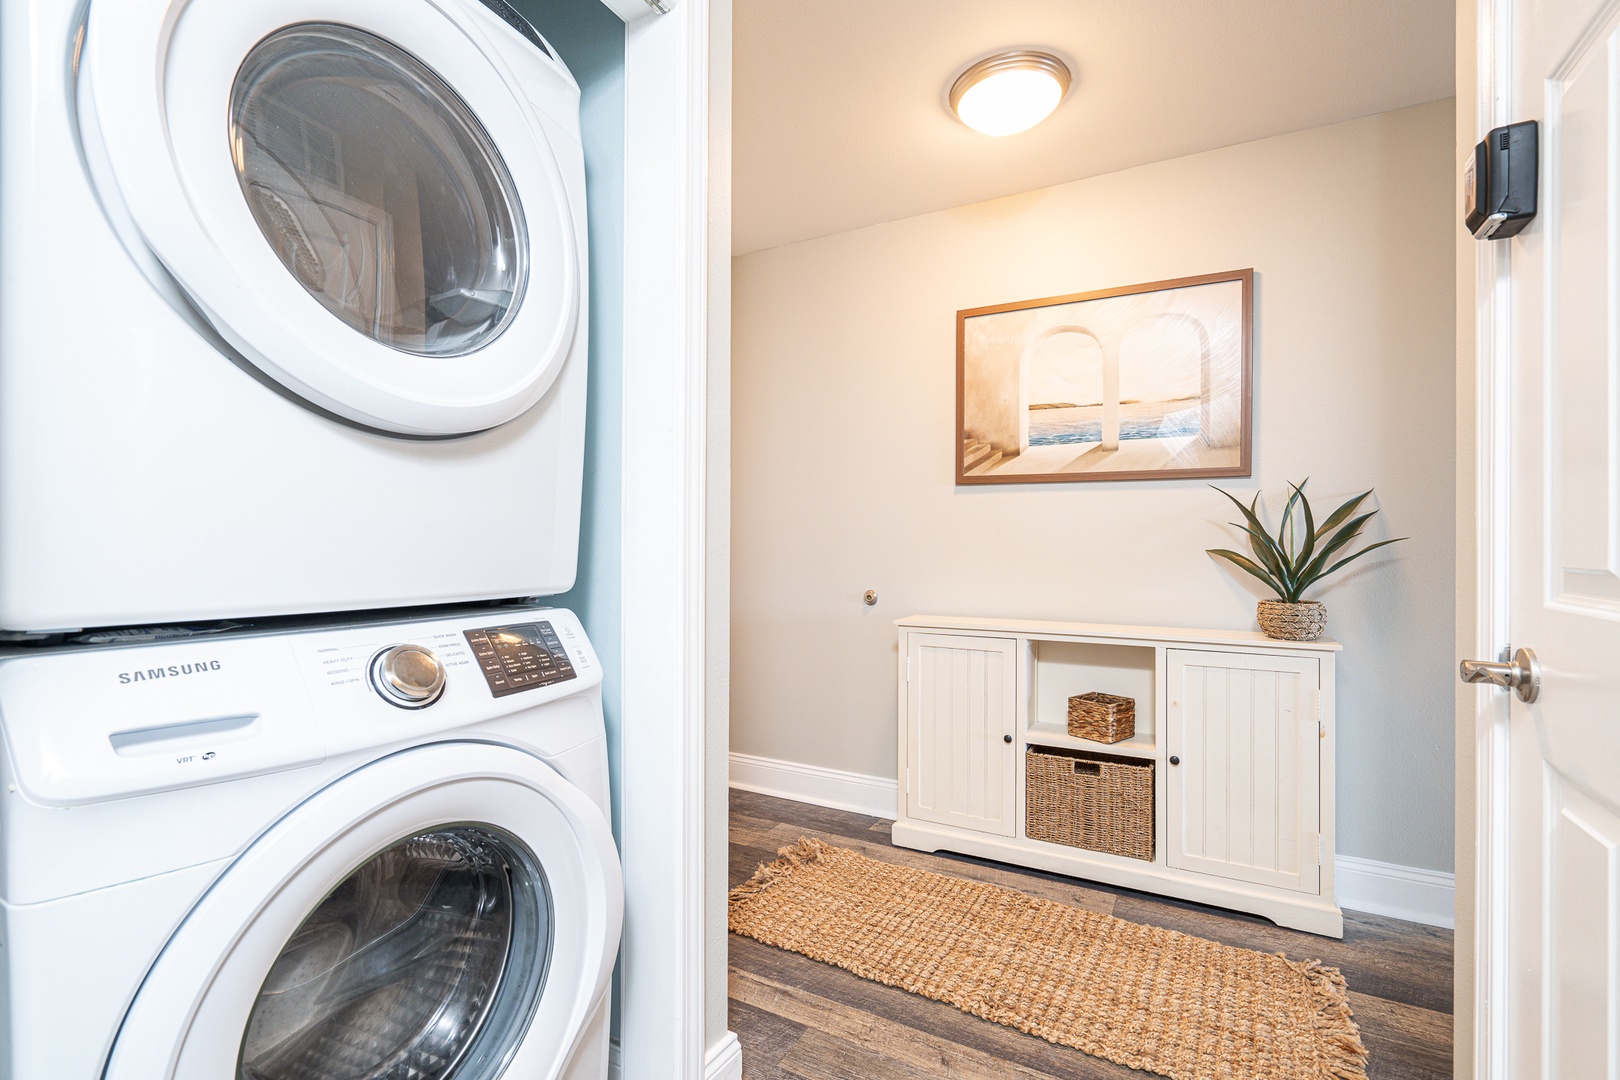 The entryway offers laundry & a snug sleeping nook for a warm welcome